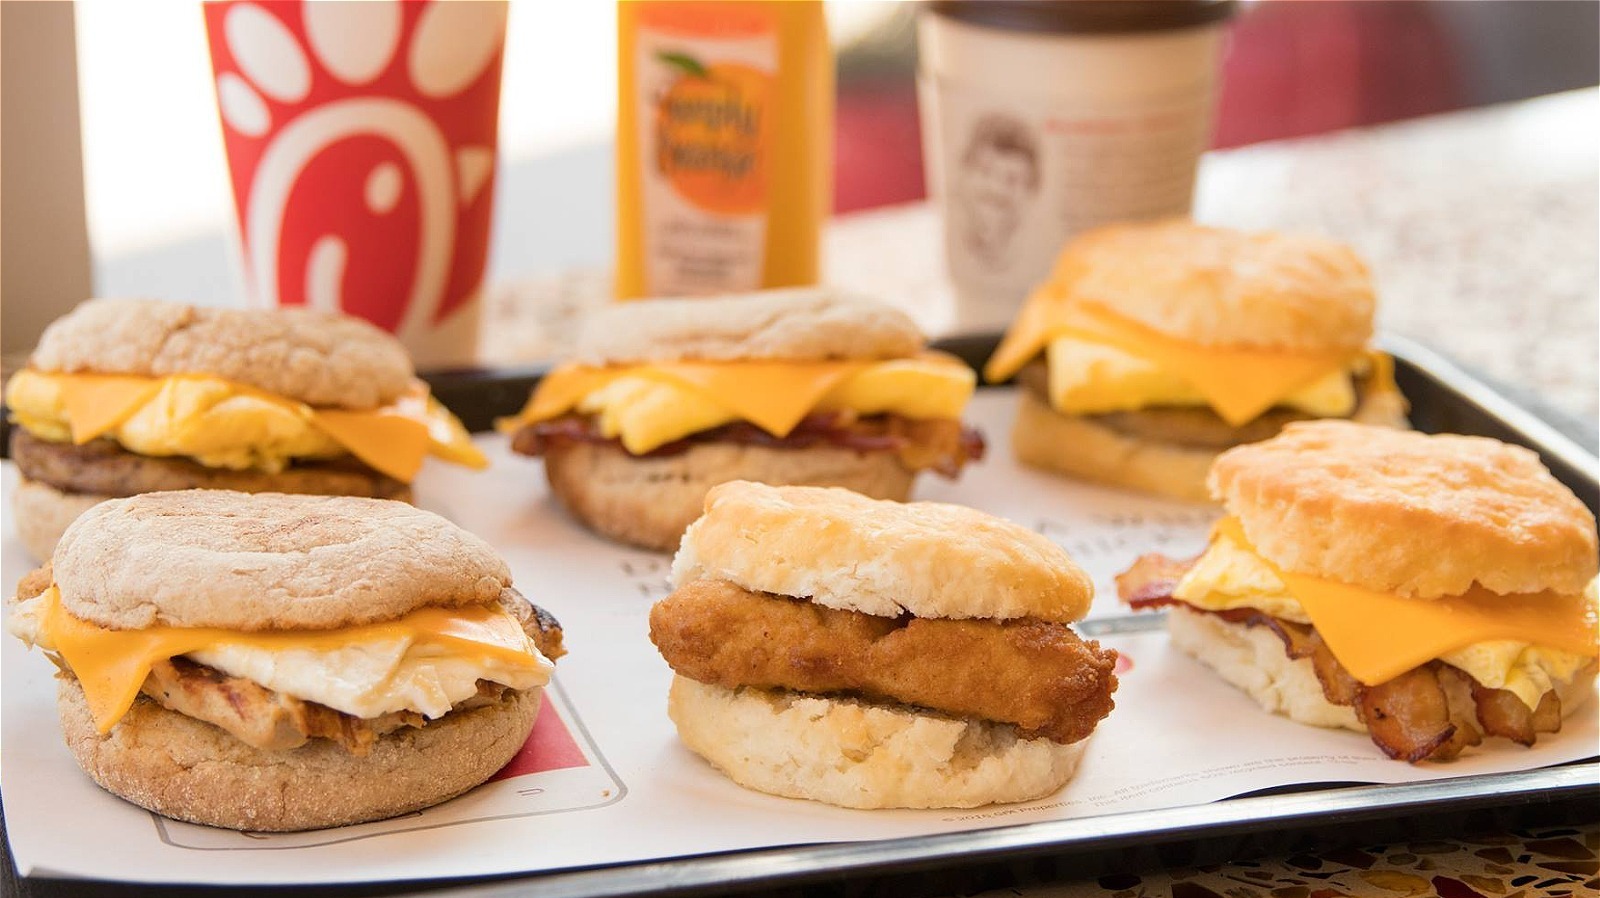 28 Agree This Is The Best ChickFilA Breakfast Item